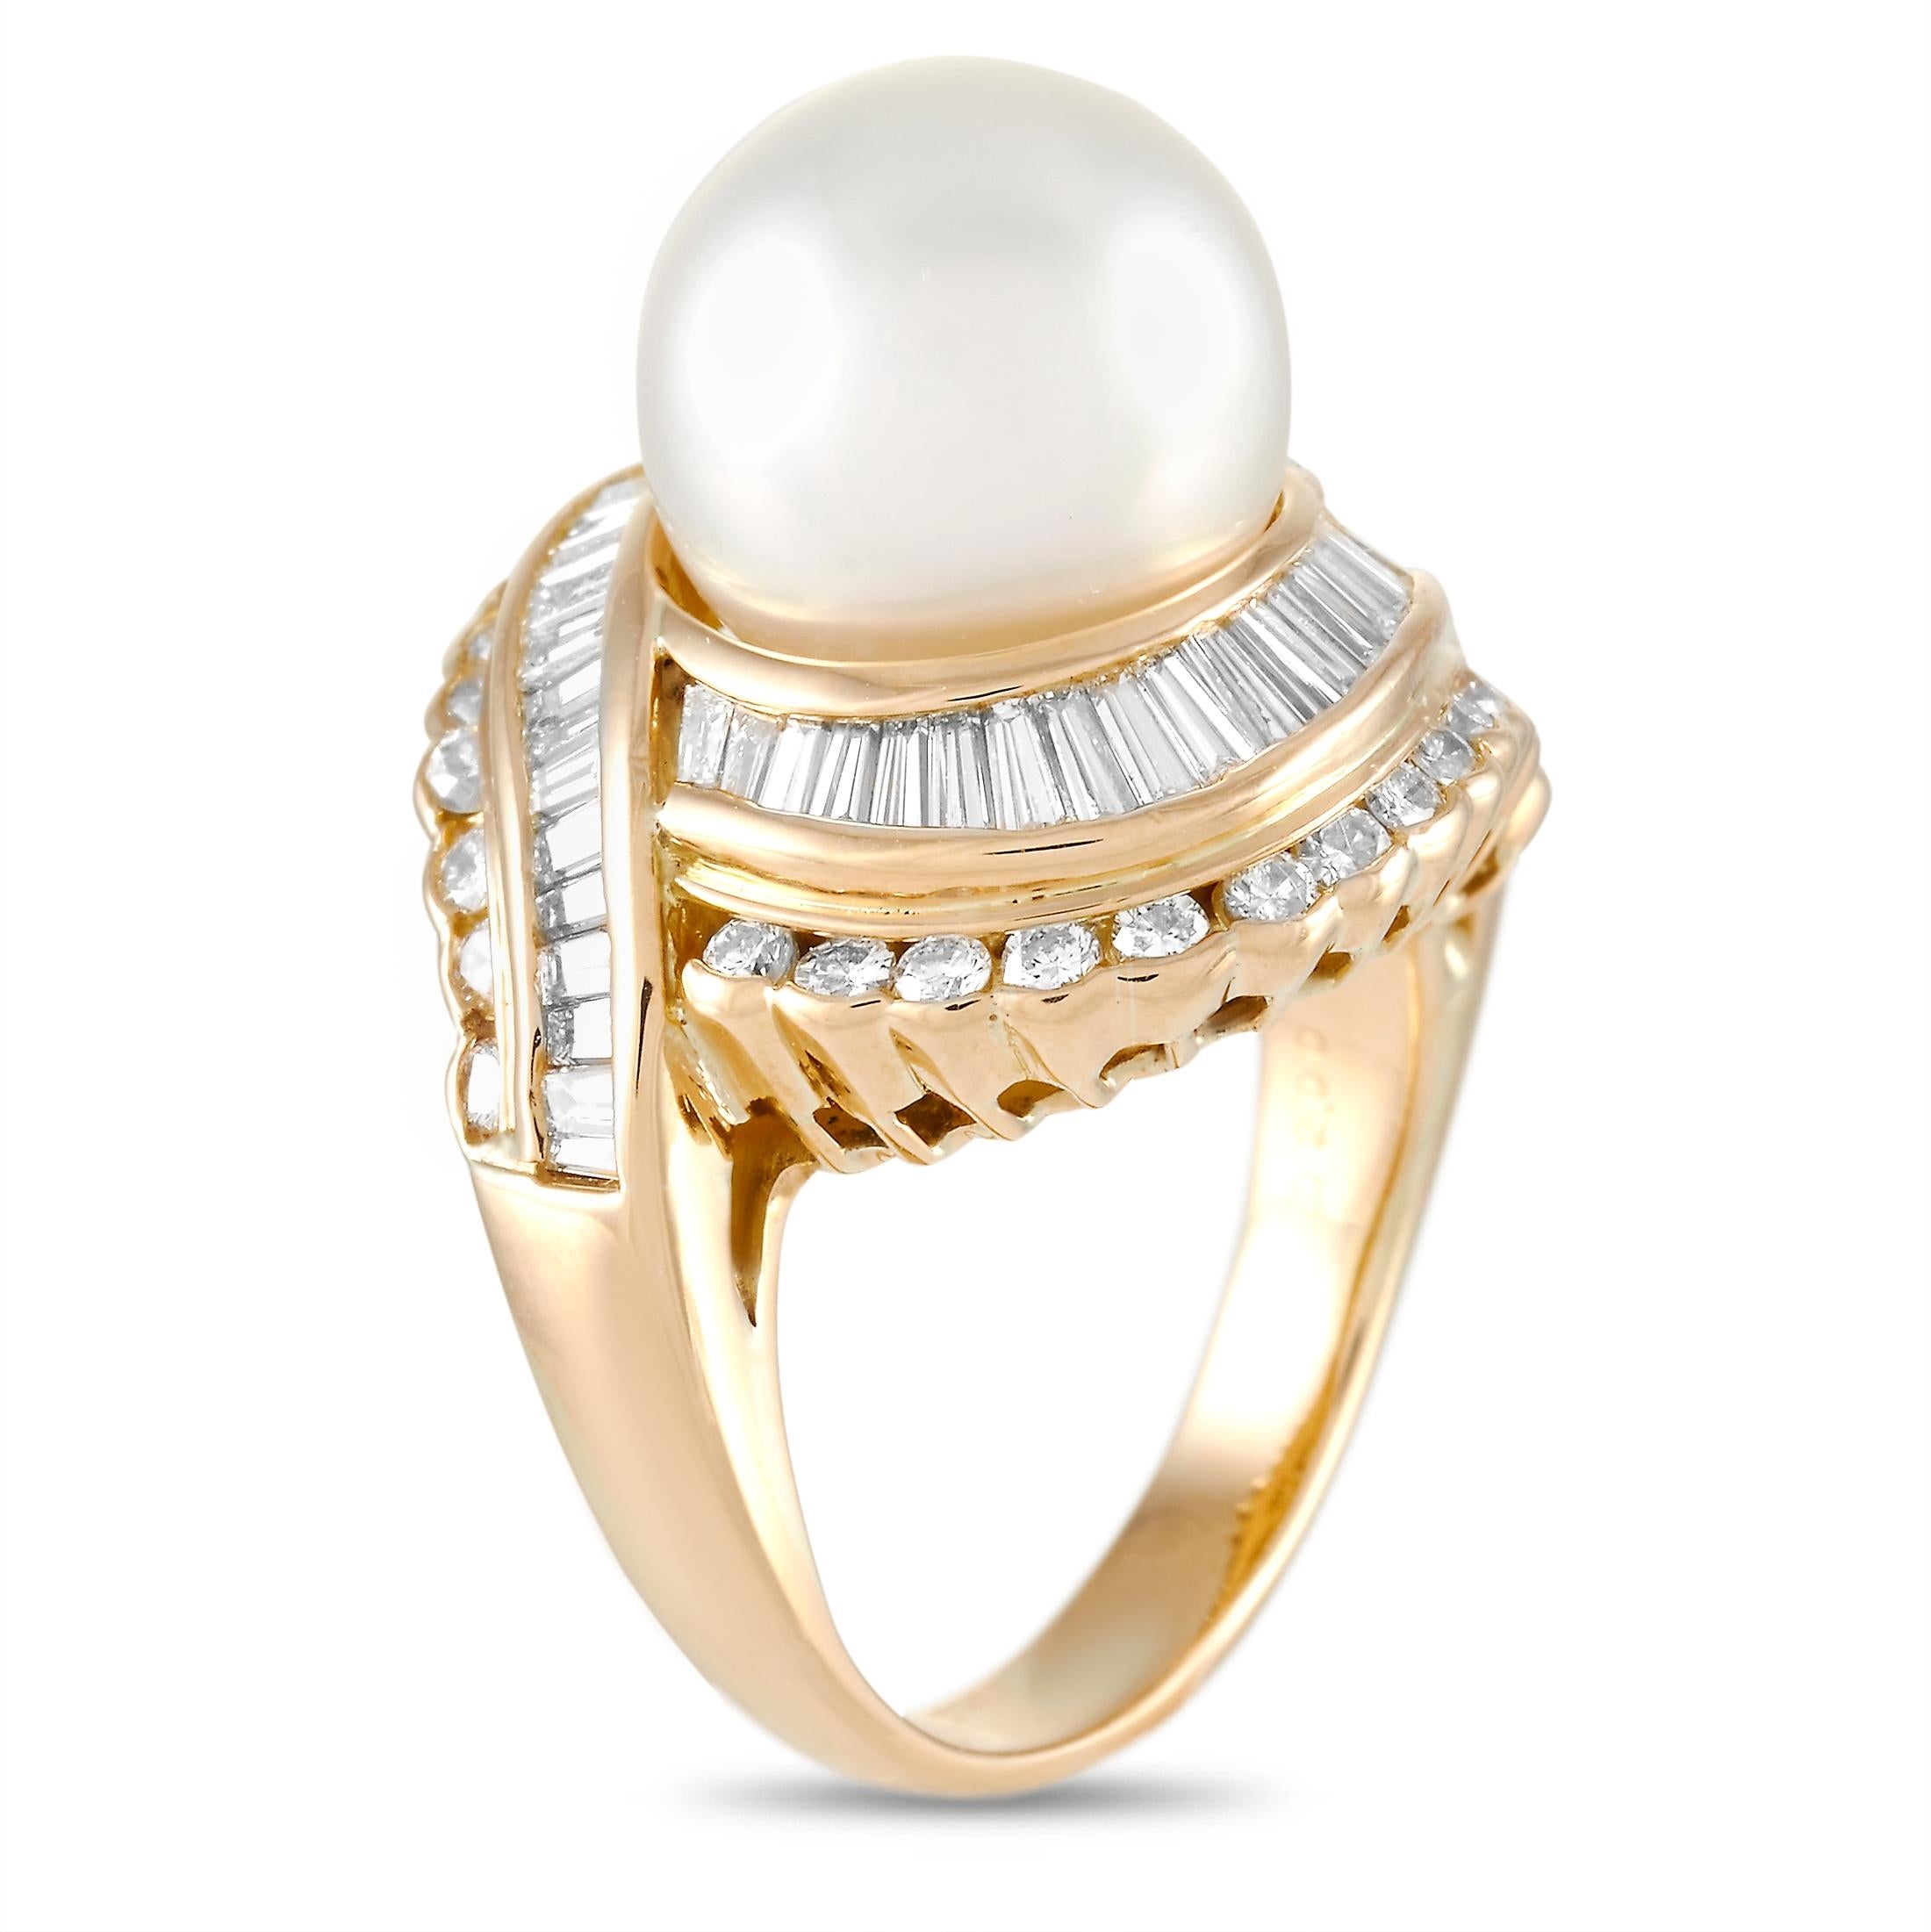 This LB Exclusive ring is made of 18K yellow gold and embellished with an 11.7 mm pearl and a total of 2.00 carats of diamonds. The ring weighs 15.4 grams and boasts band thickness of 3 mm and top height of 17 mm, while top dimensions measure 20 by